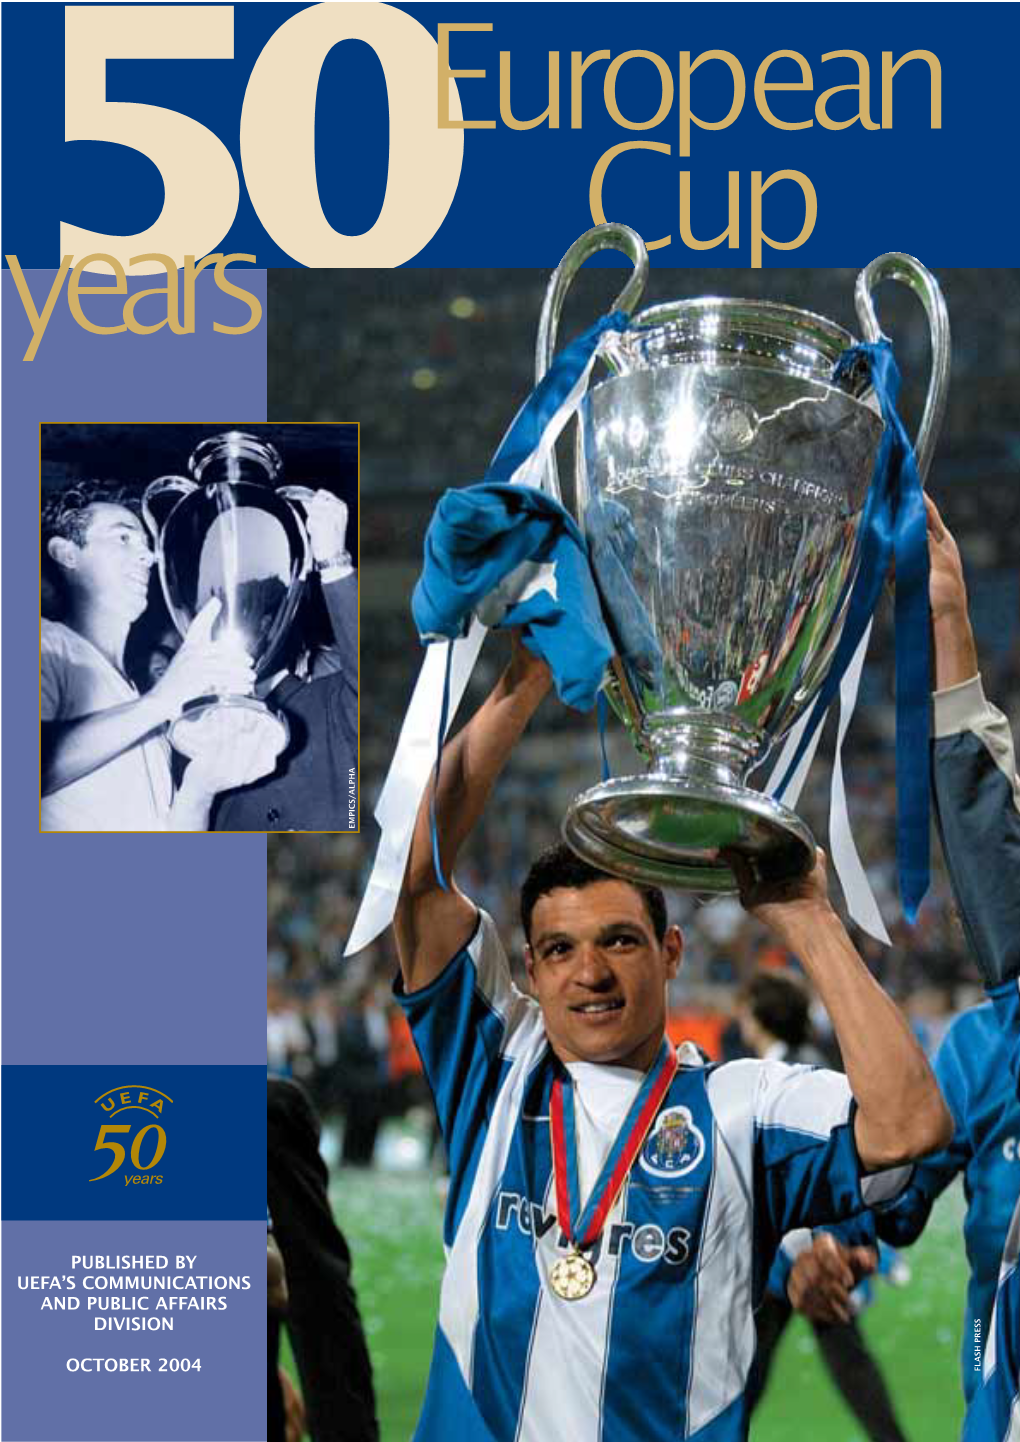 Published by Uefa's Communications and Public